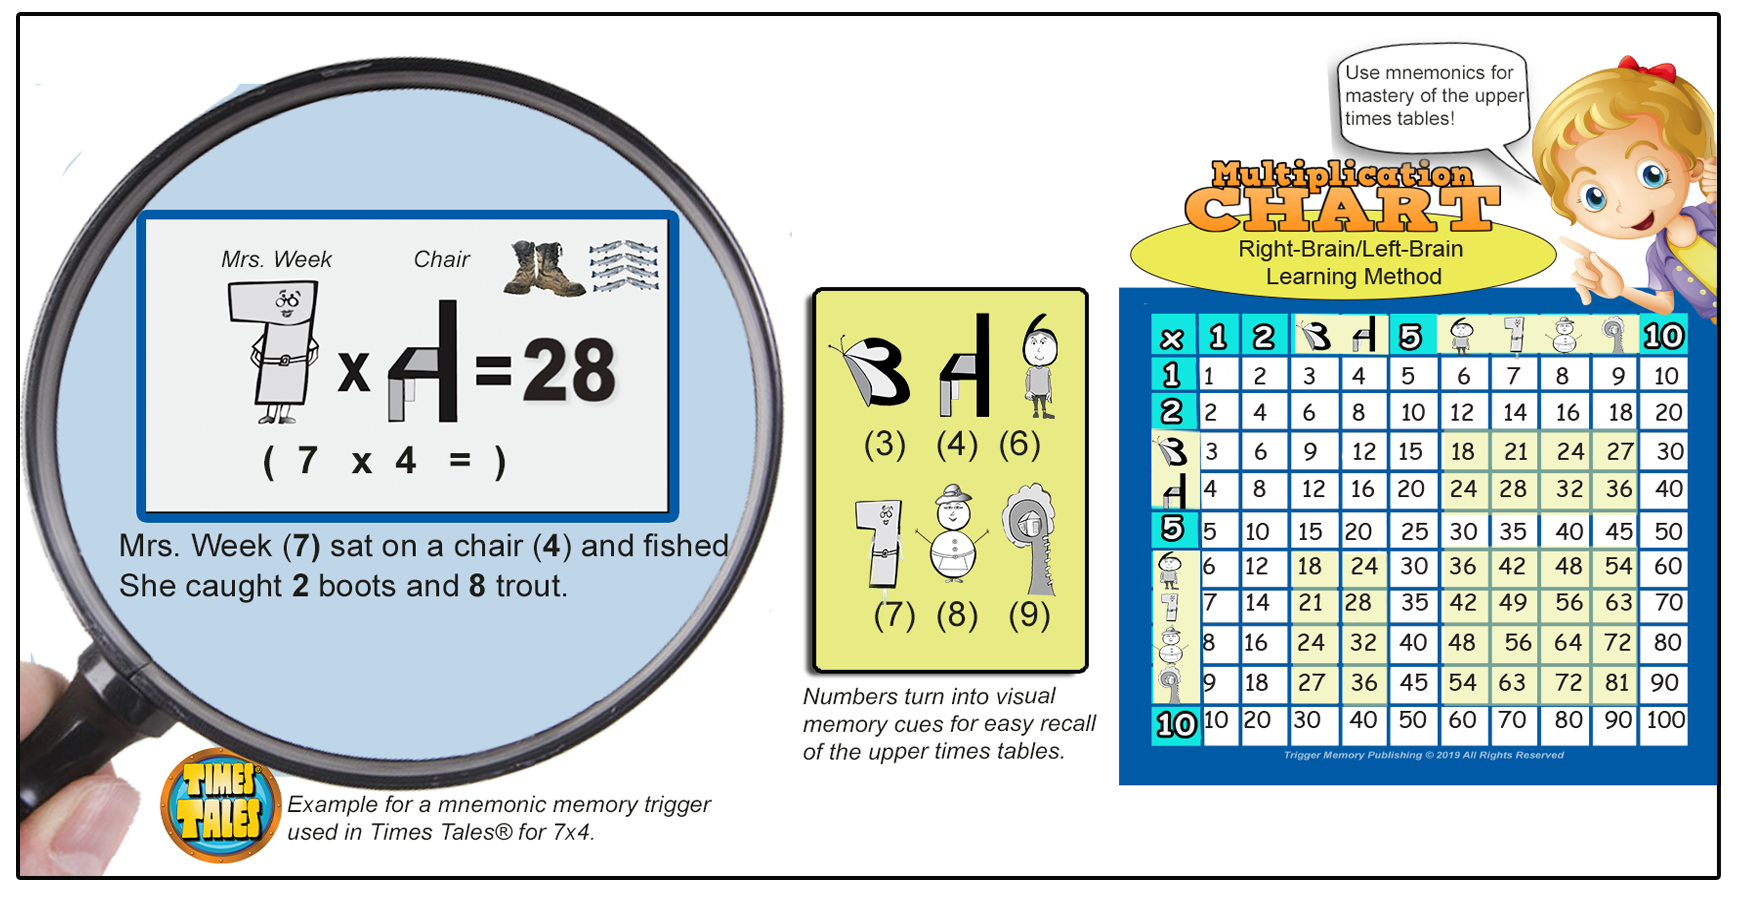 Multiplication Chart for Kids - Mnemonic Memorization is the New Way for Kids to Learn Multiplication Tables